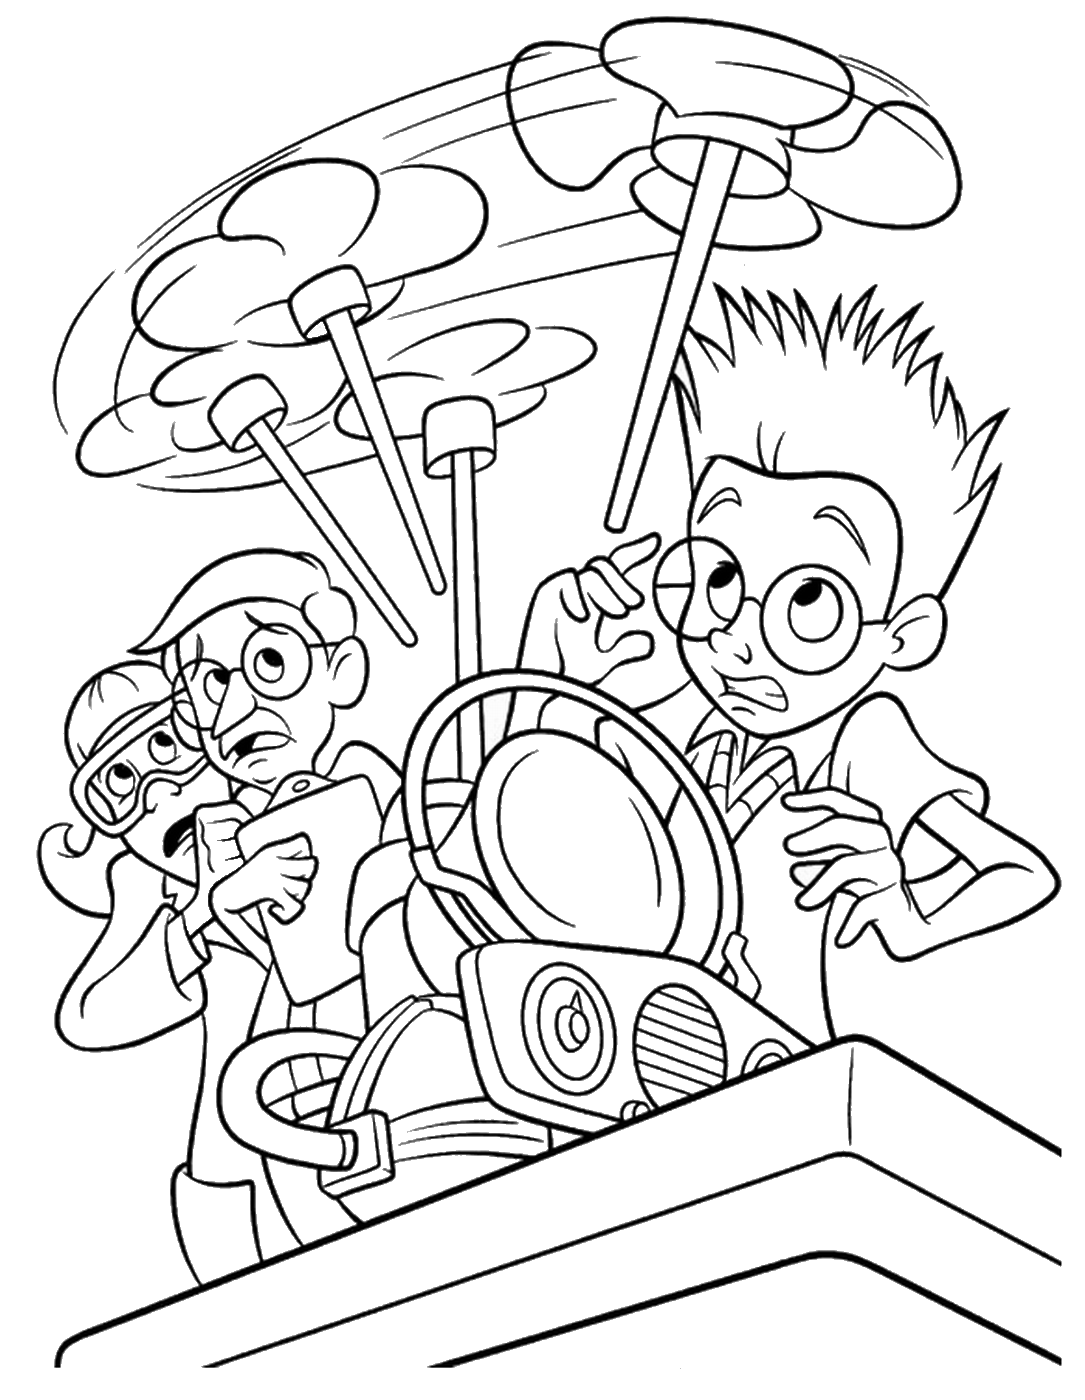 Meet the Robinsons Coloring Pages TV Film meet_the_robinsons Printable 2020 04952 Coloring4free